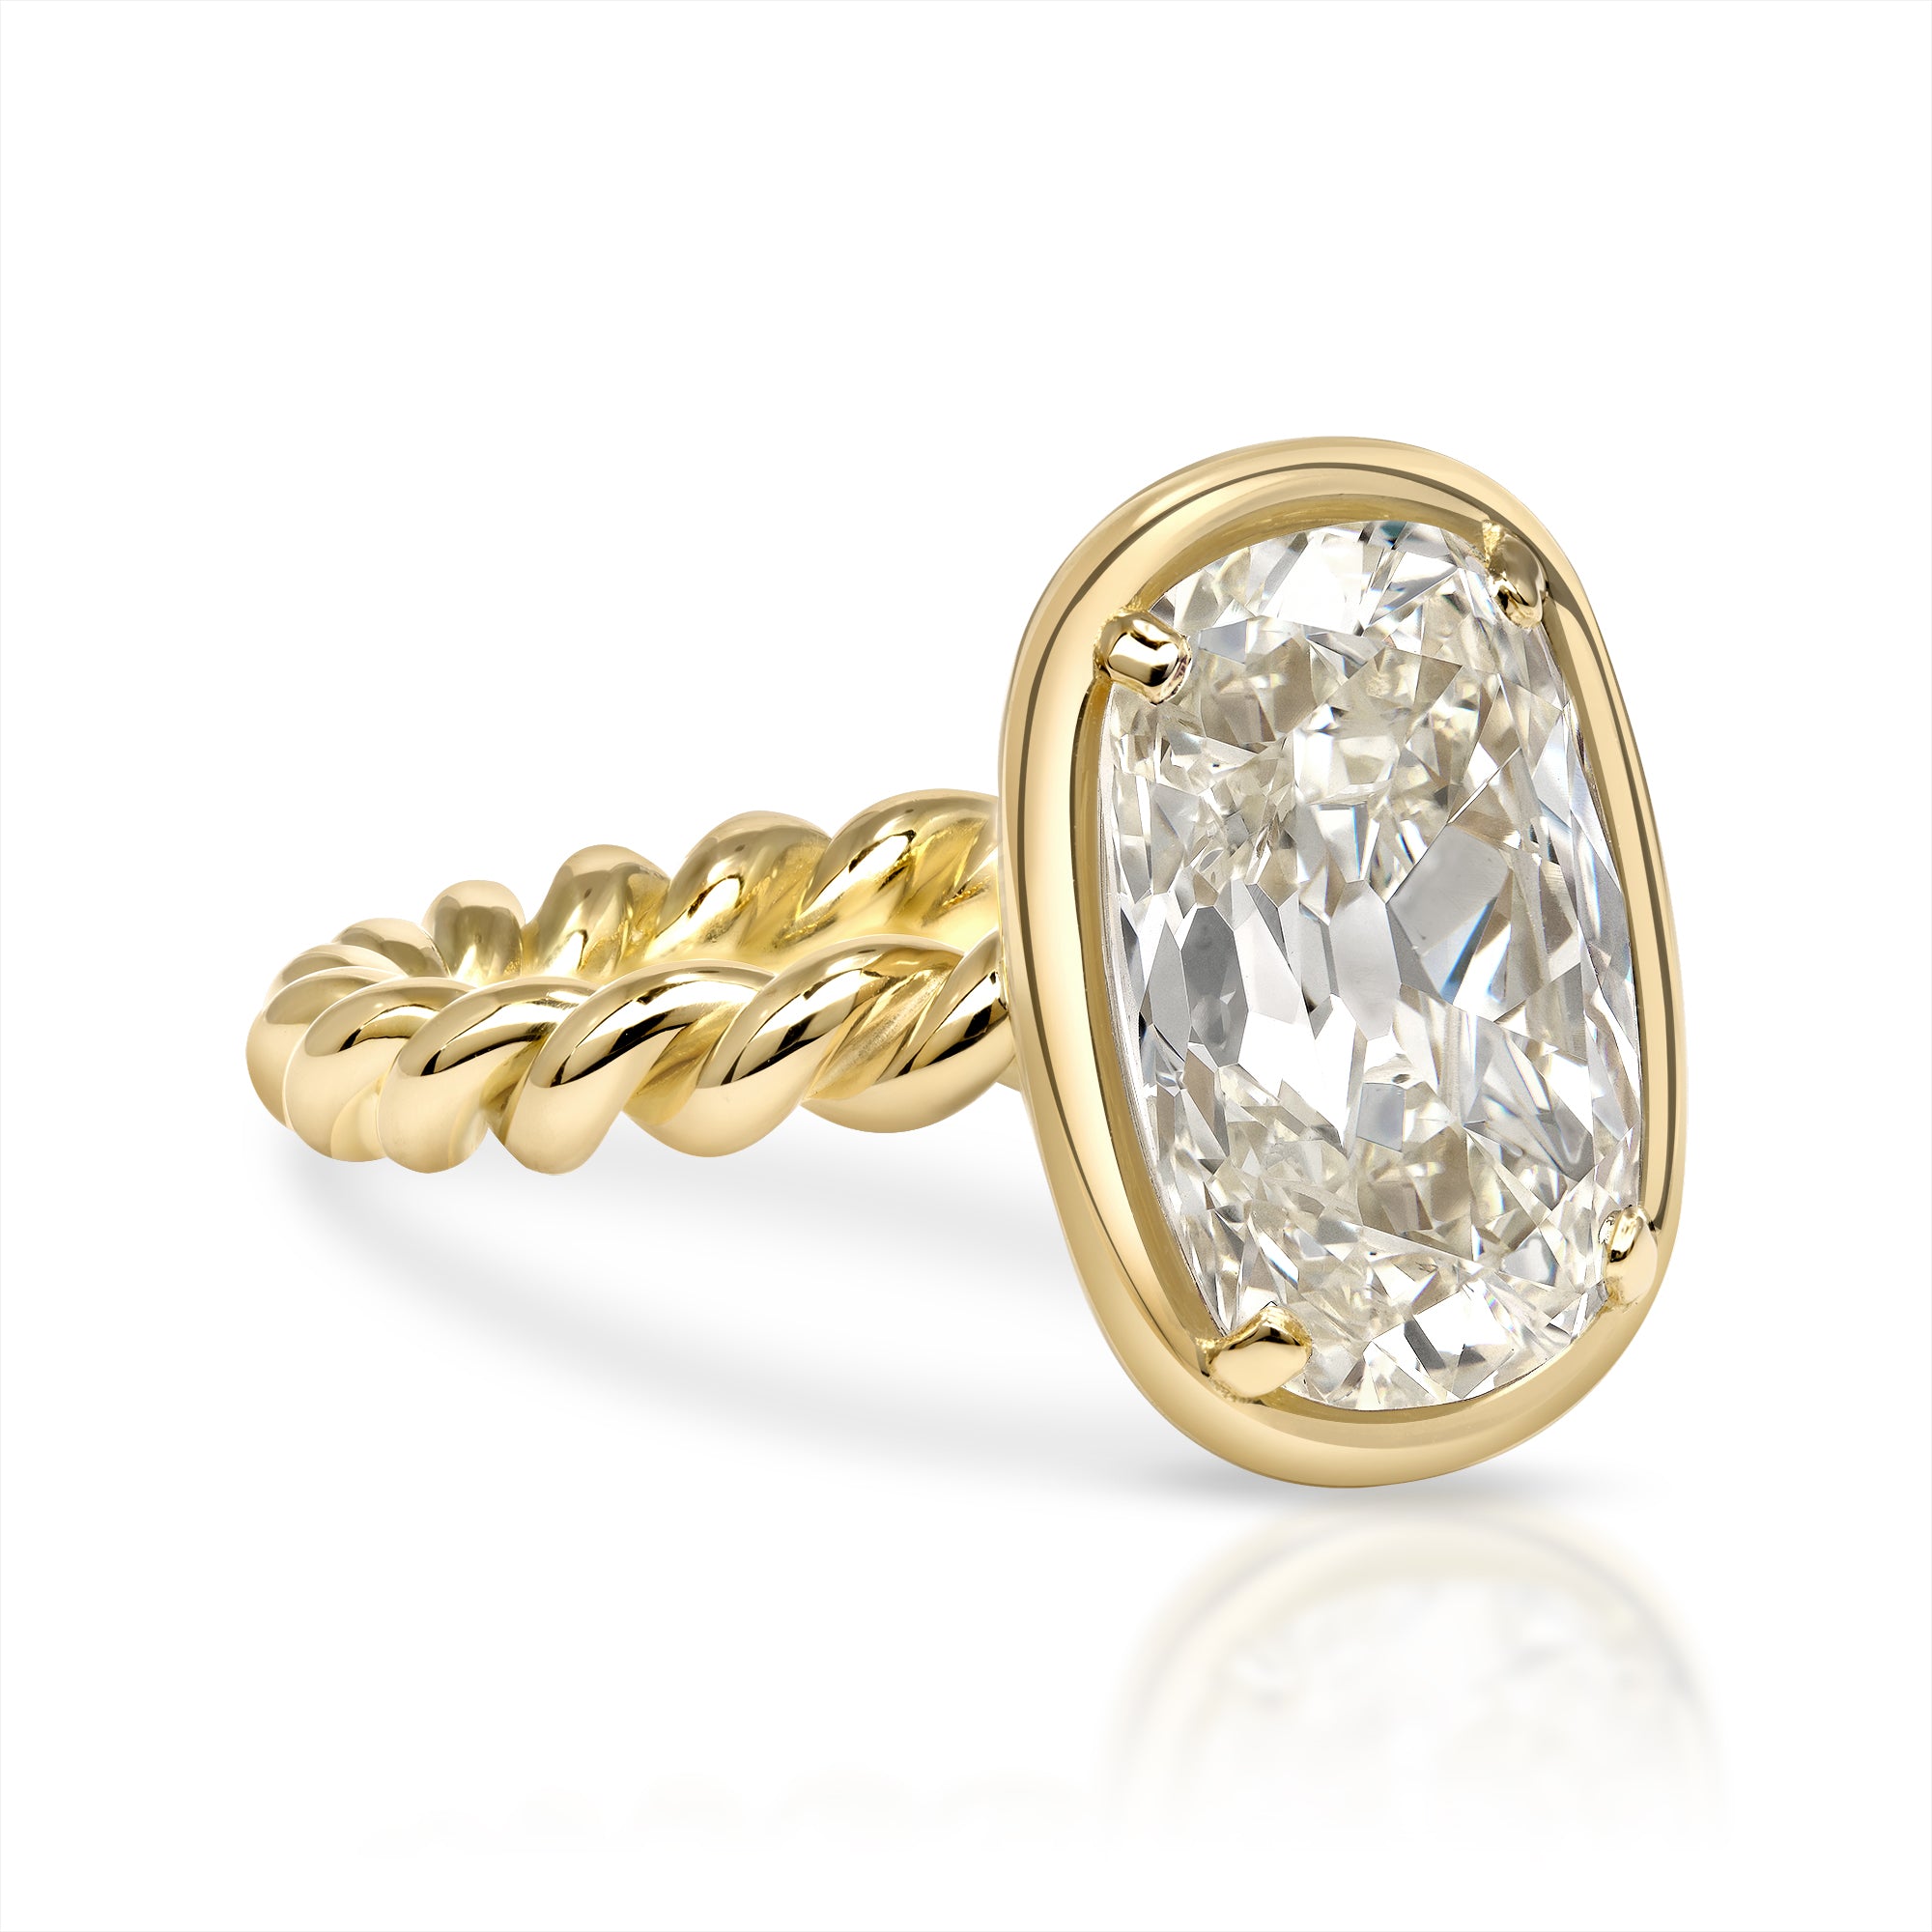 SINGLE STONE LARA RING featuring 5.09ct S-T/VS1 GIA certified antique Cushion cut diamond bezel set in a handcrafted 18K yellow gold mounting.